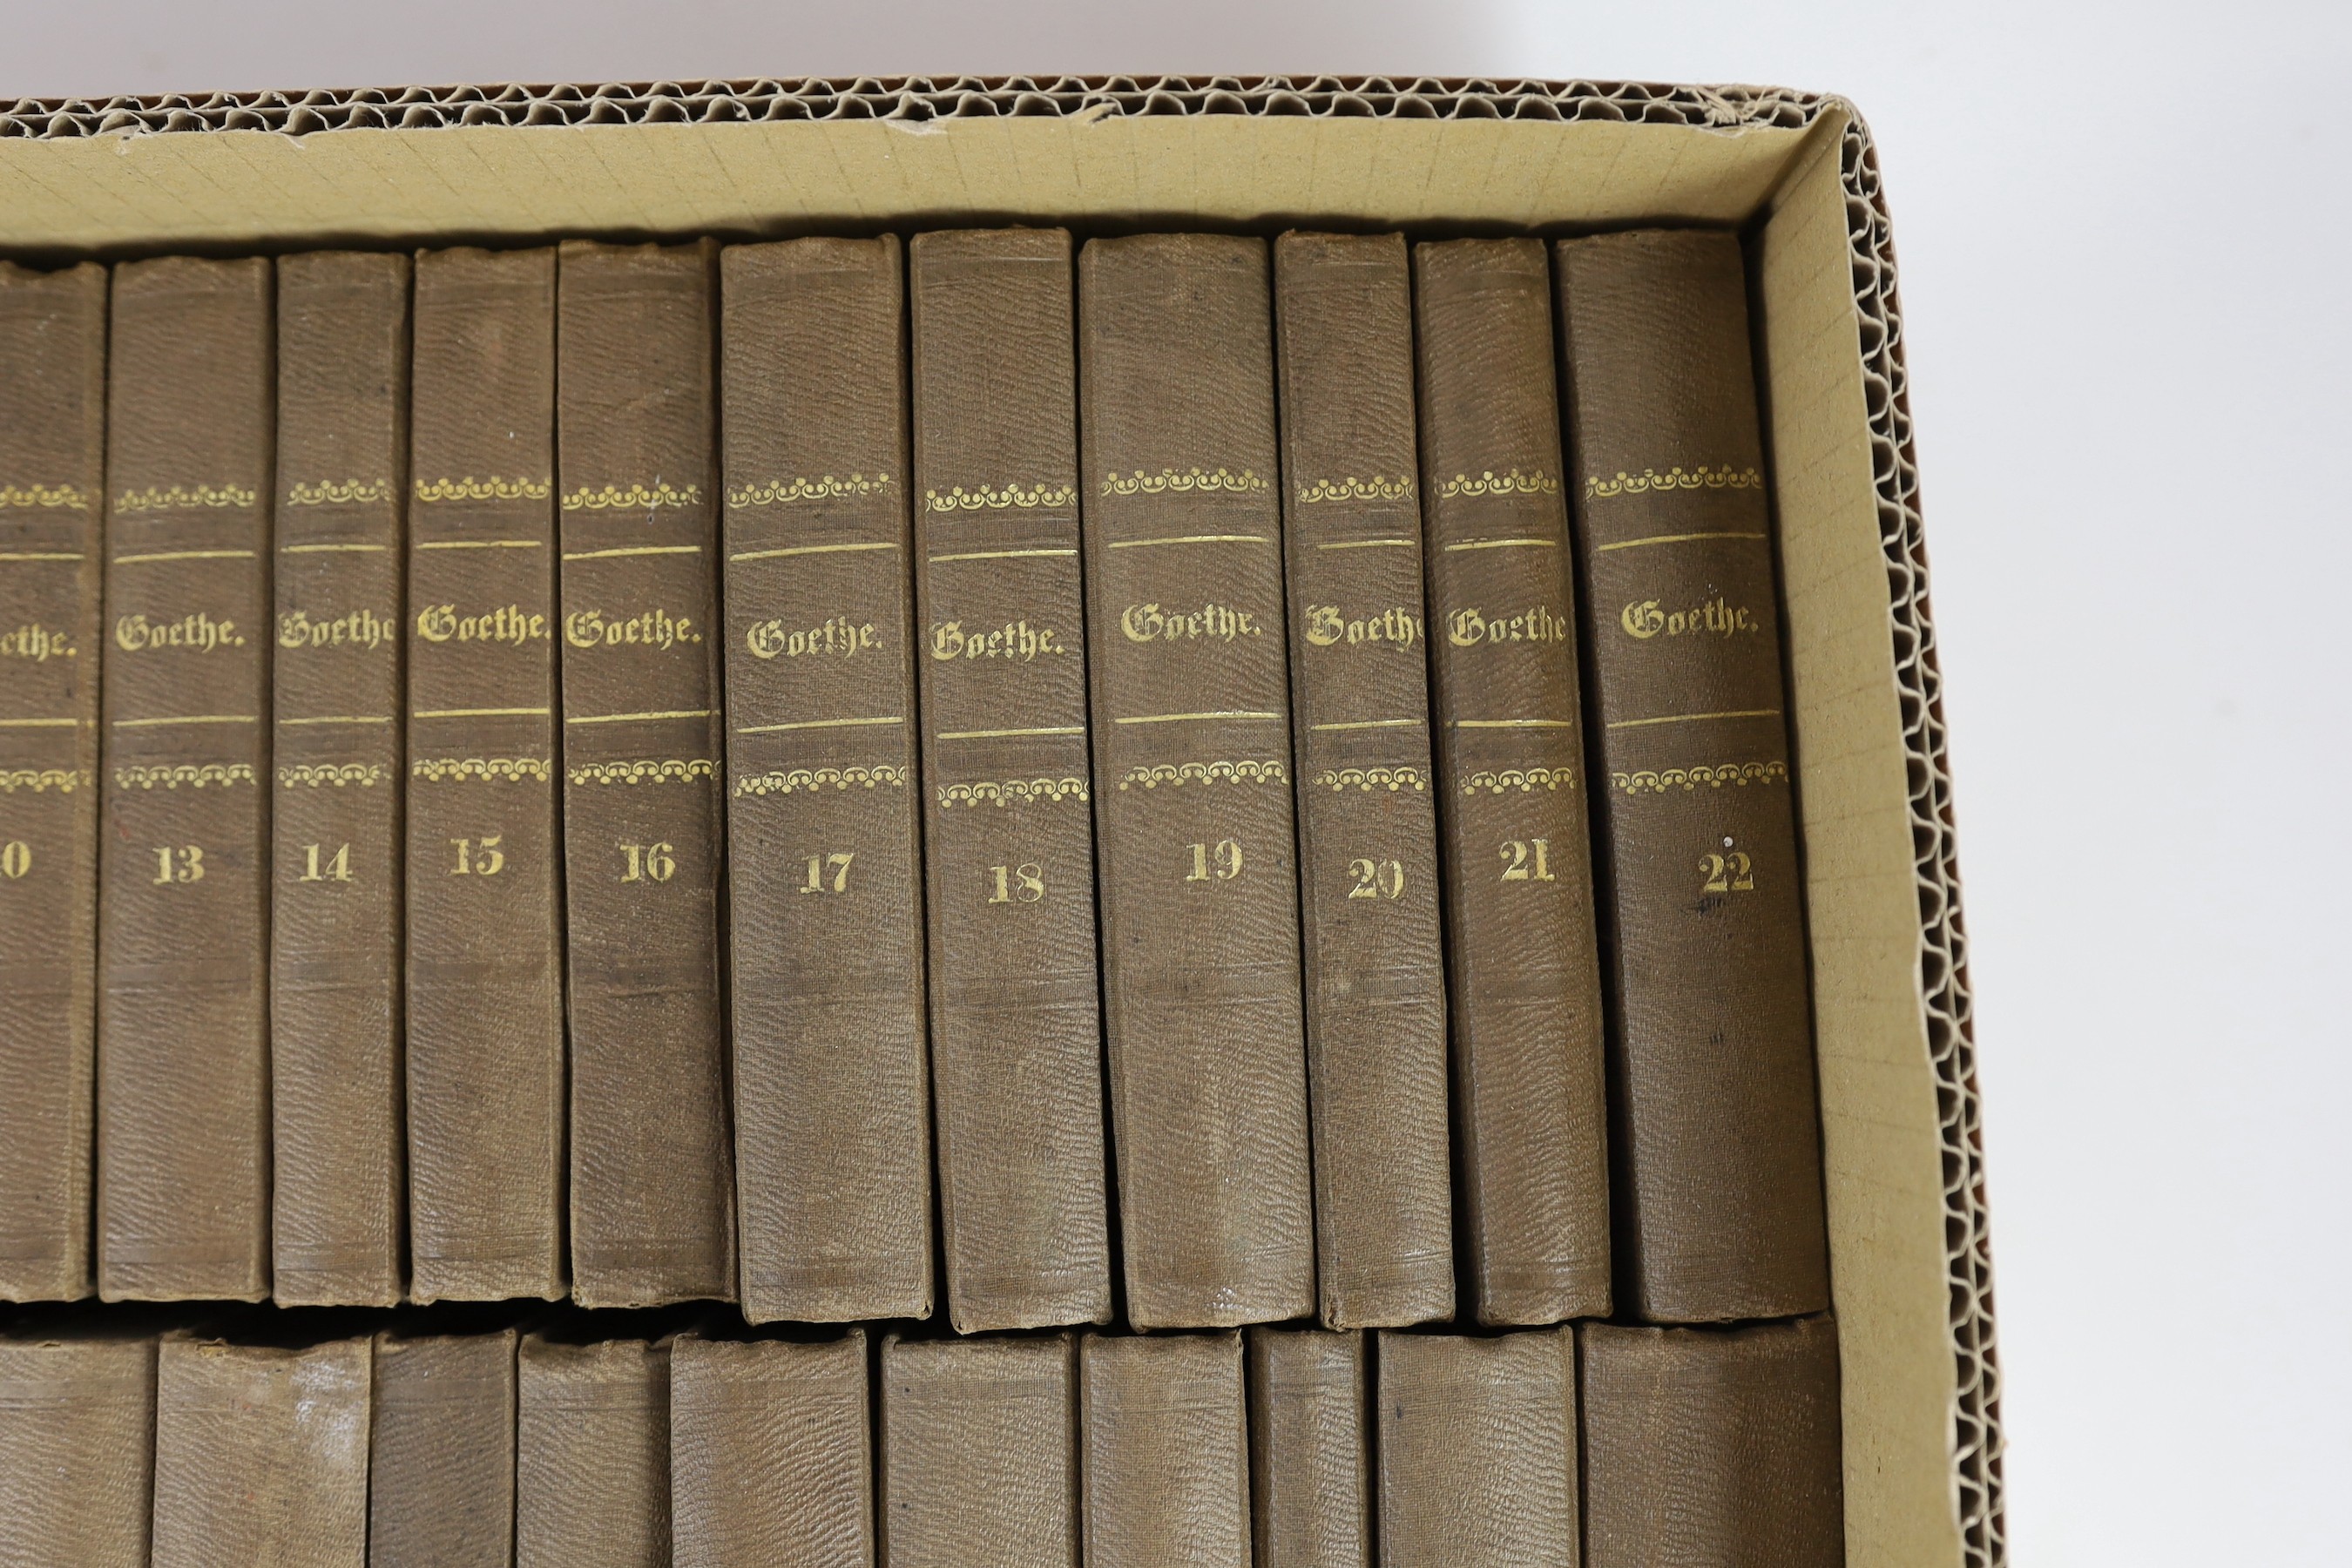 ° ° Goethe, Johanna Wolfgang - The Works in German, 35 vols (of 40), 12mo, half cloth, gilt embossed - Image 4 of 7